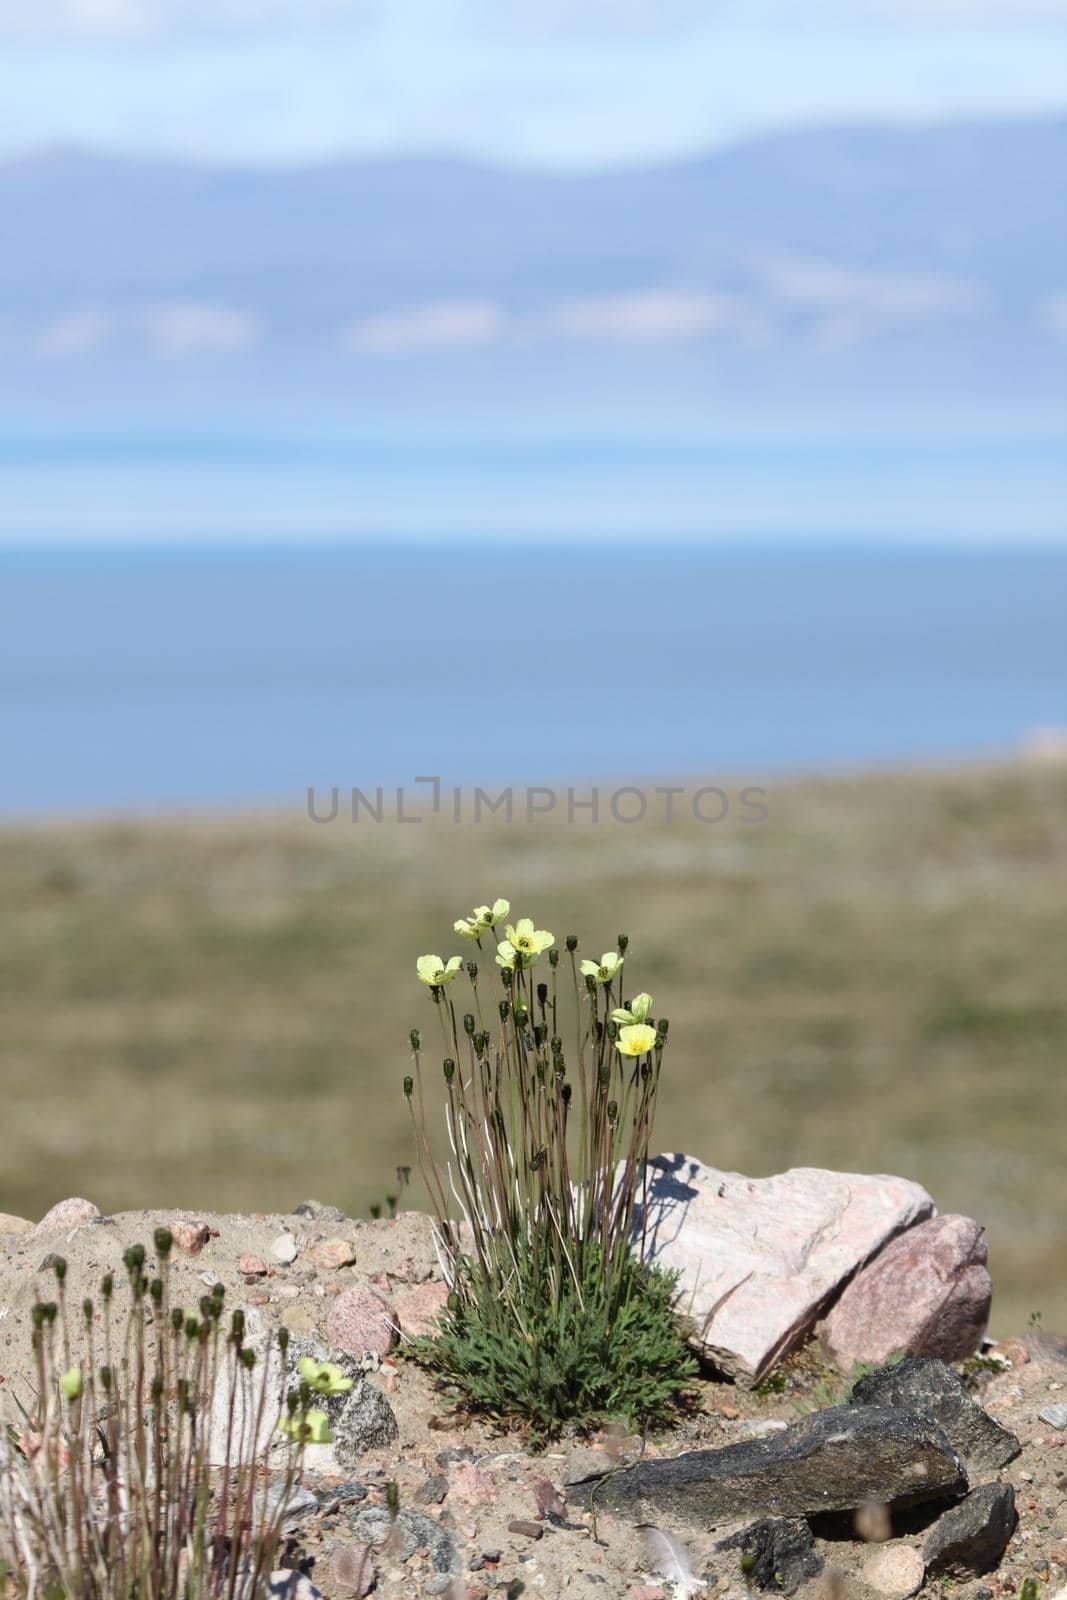 Arctic poppy flowering on a bare rock in the arctic, Pond Inlet, Nunavut by Granchinho